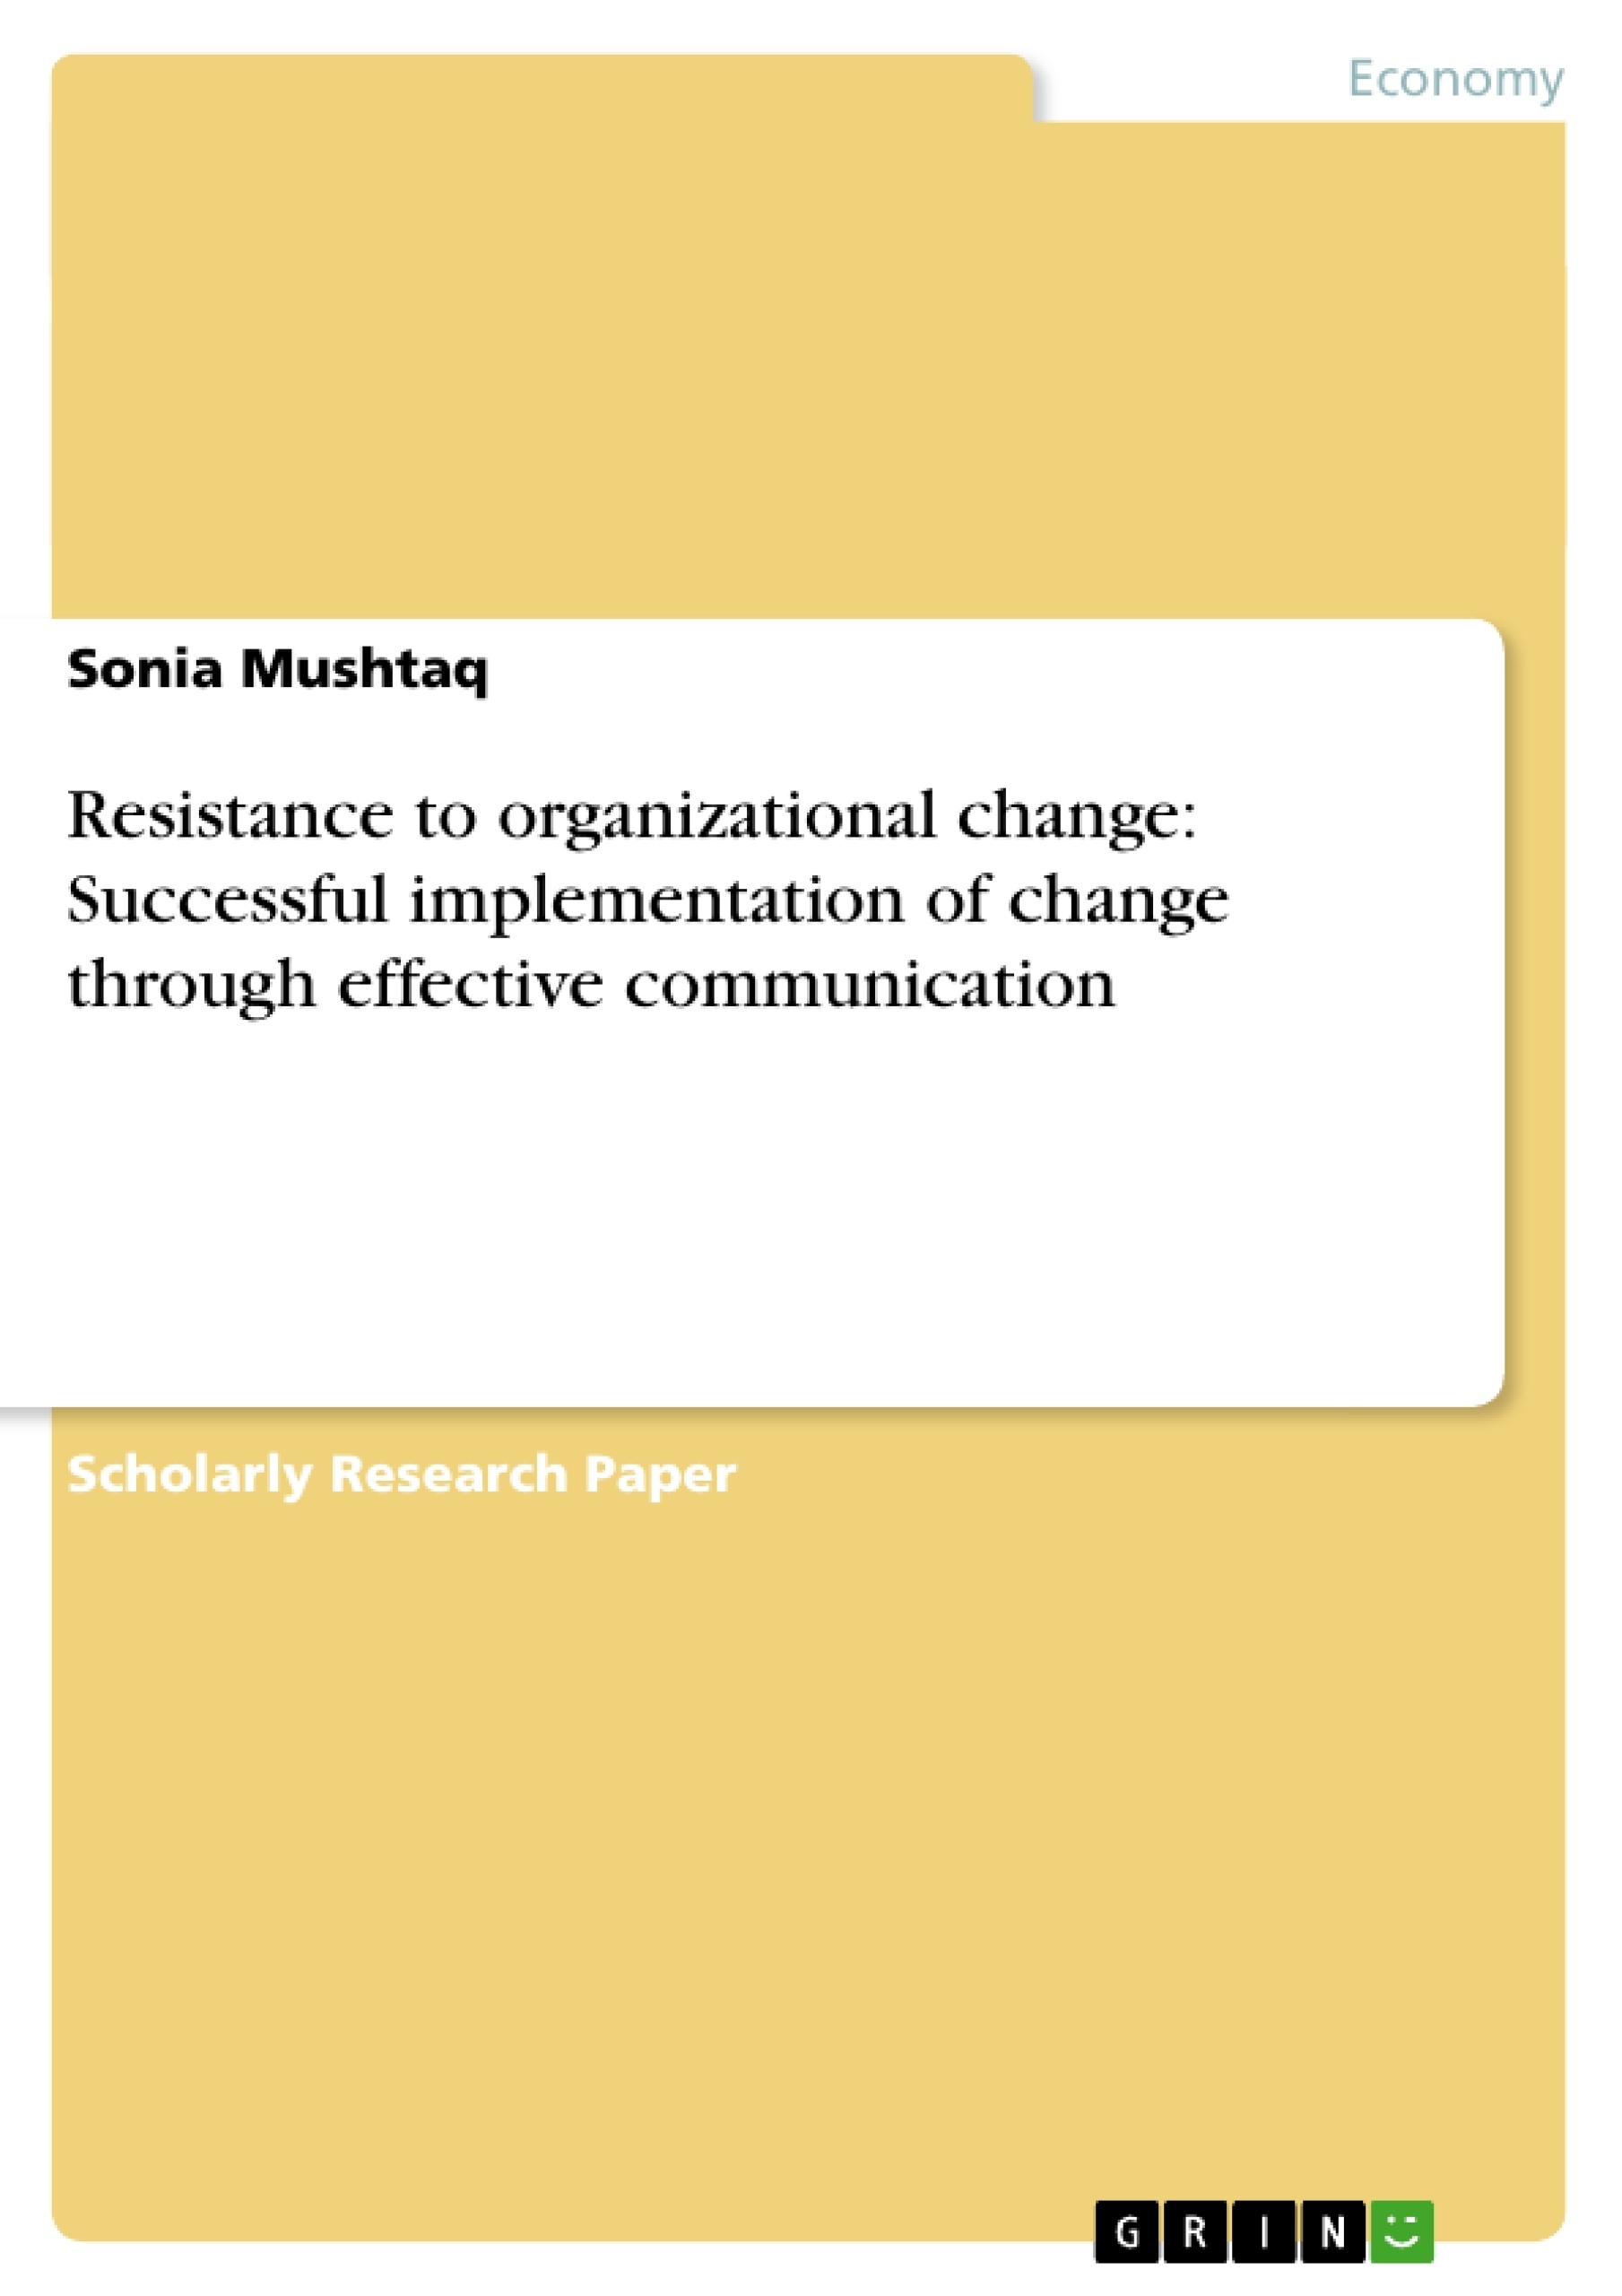 Title: Resistance to organizational change: Successful implementation of change through effective communication